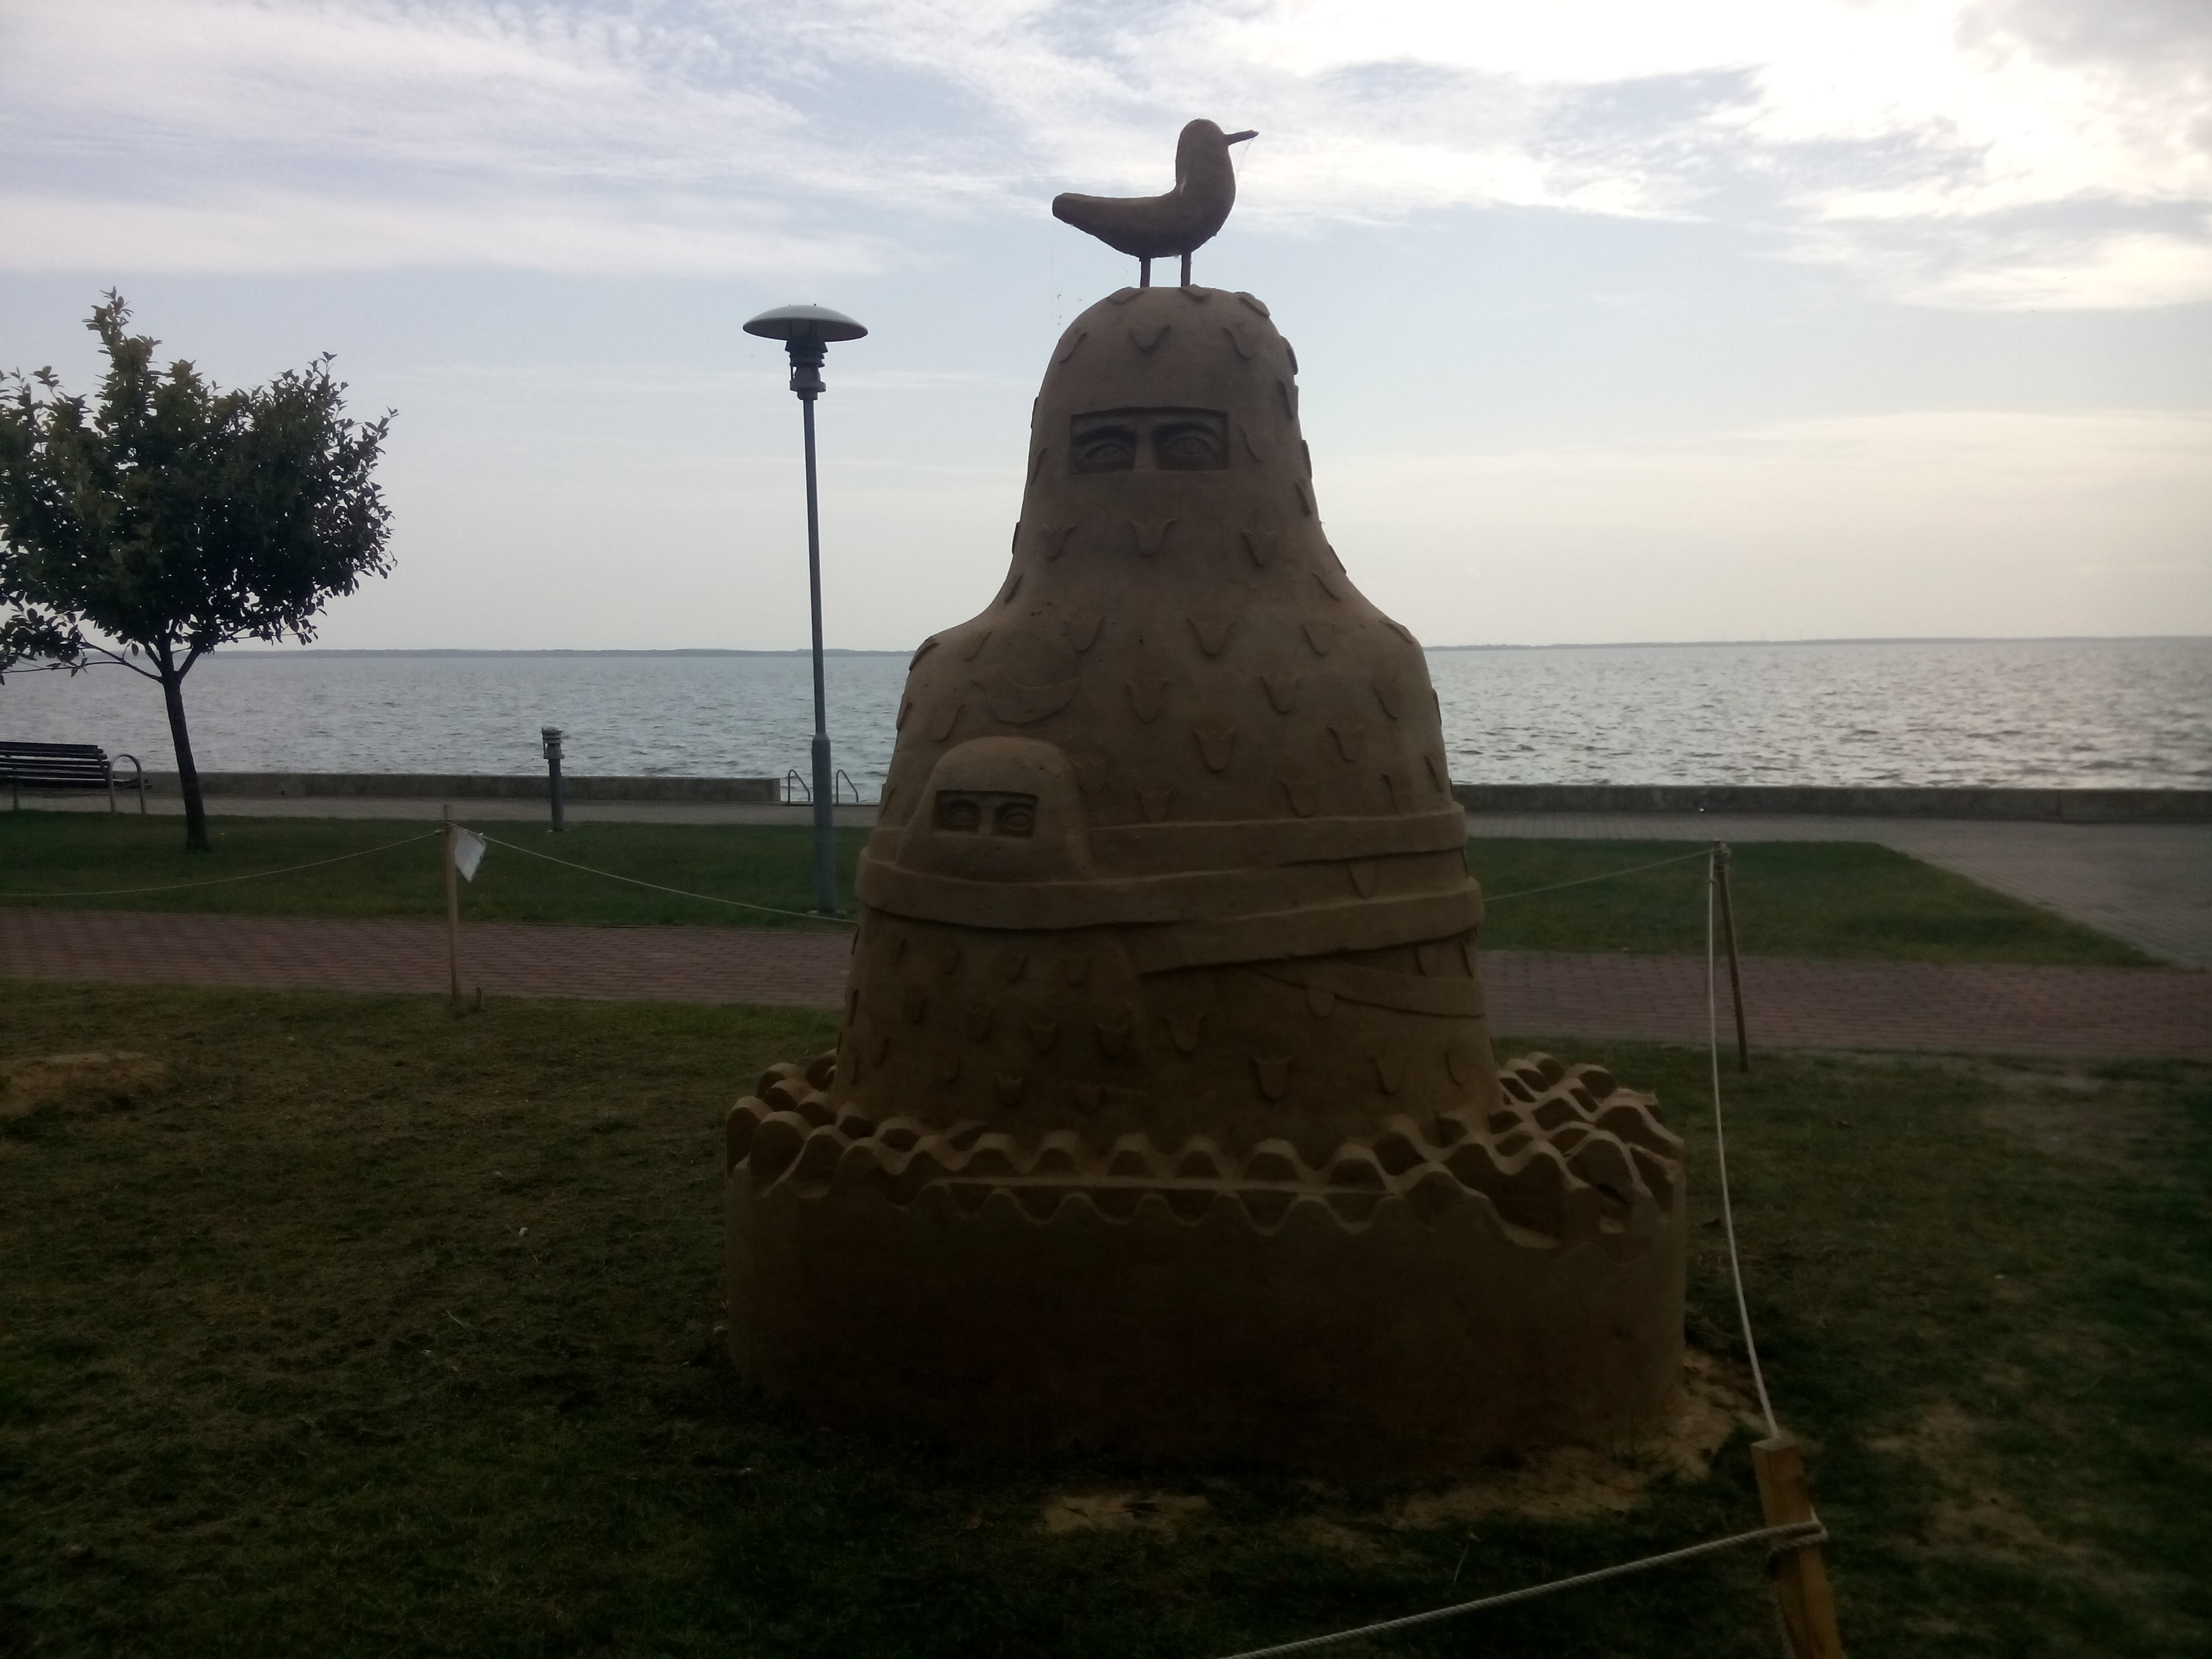 A sand sculpture of two people in veils with a seagull perched on top; the sea in the background